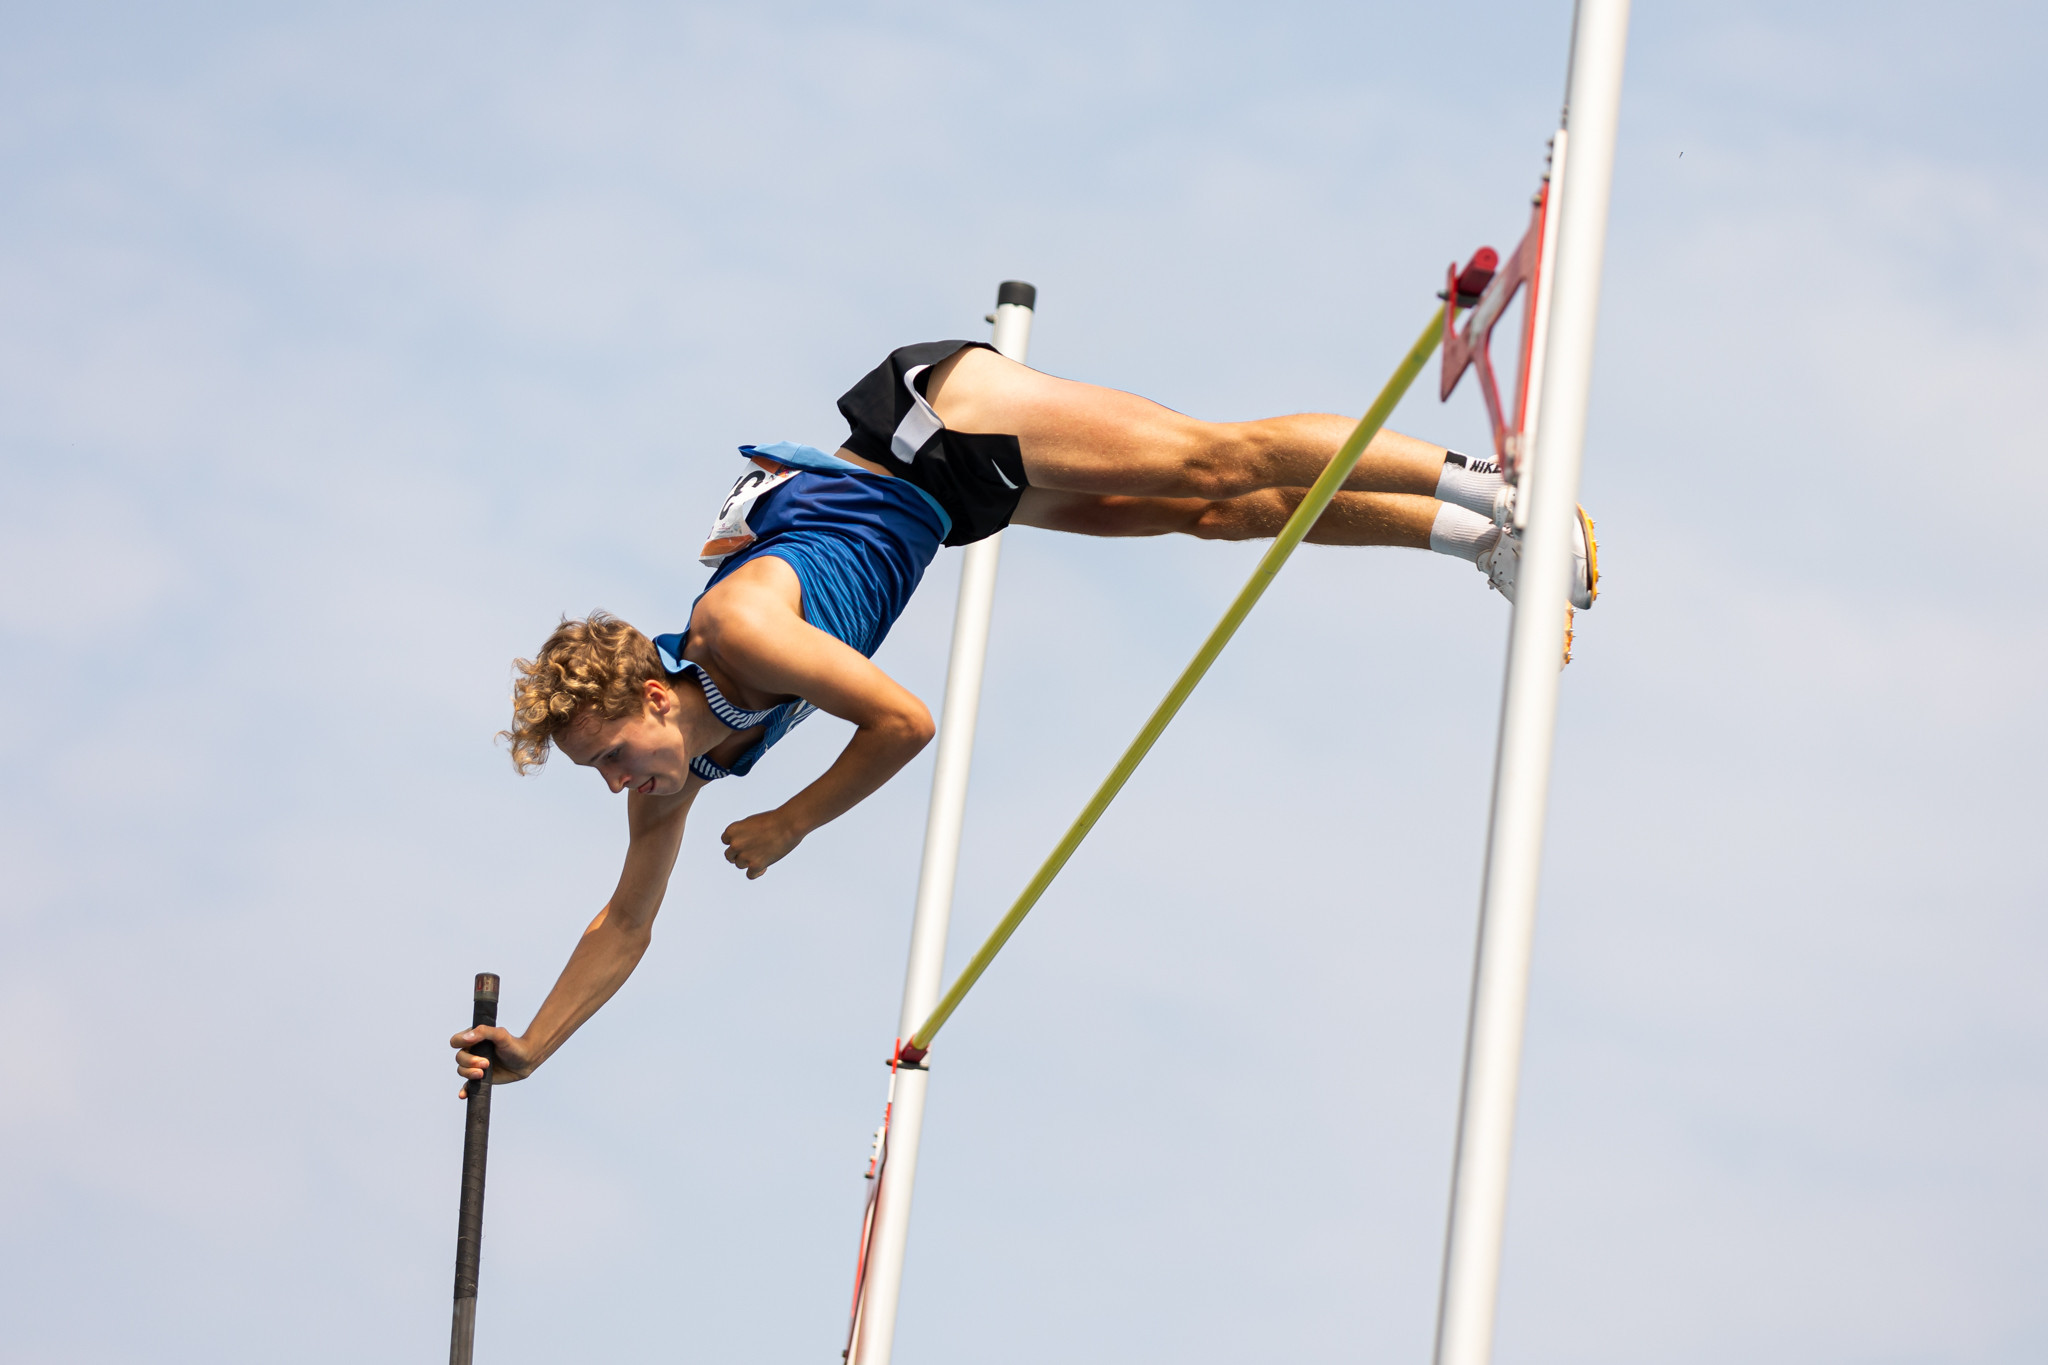 A polevaulter in action at the Olympic Park in Rio de Janeiro ©ISF